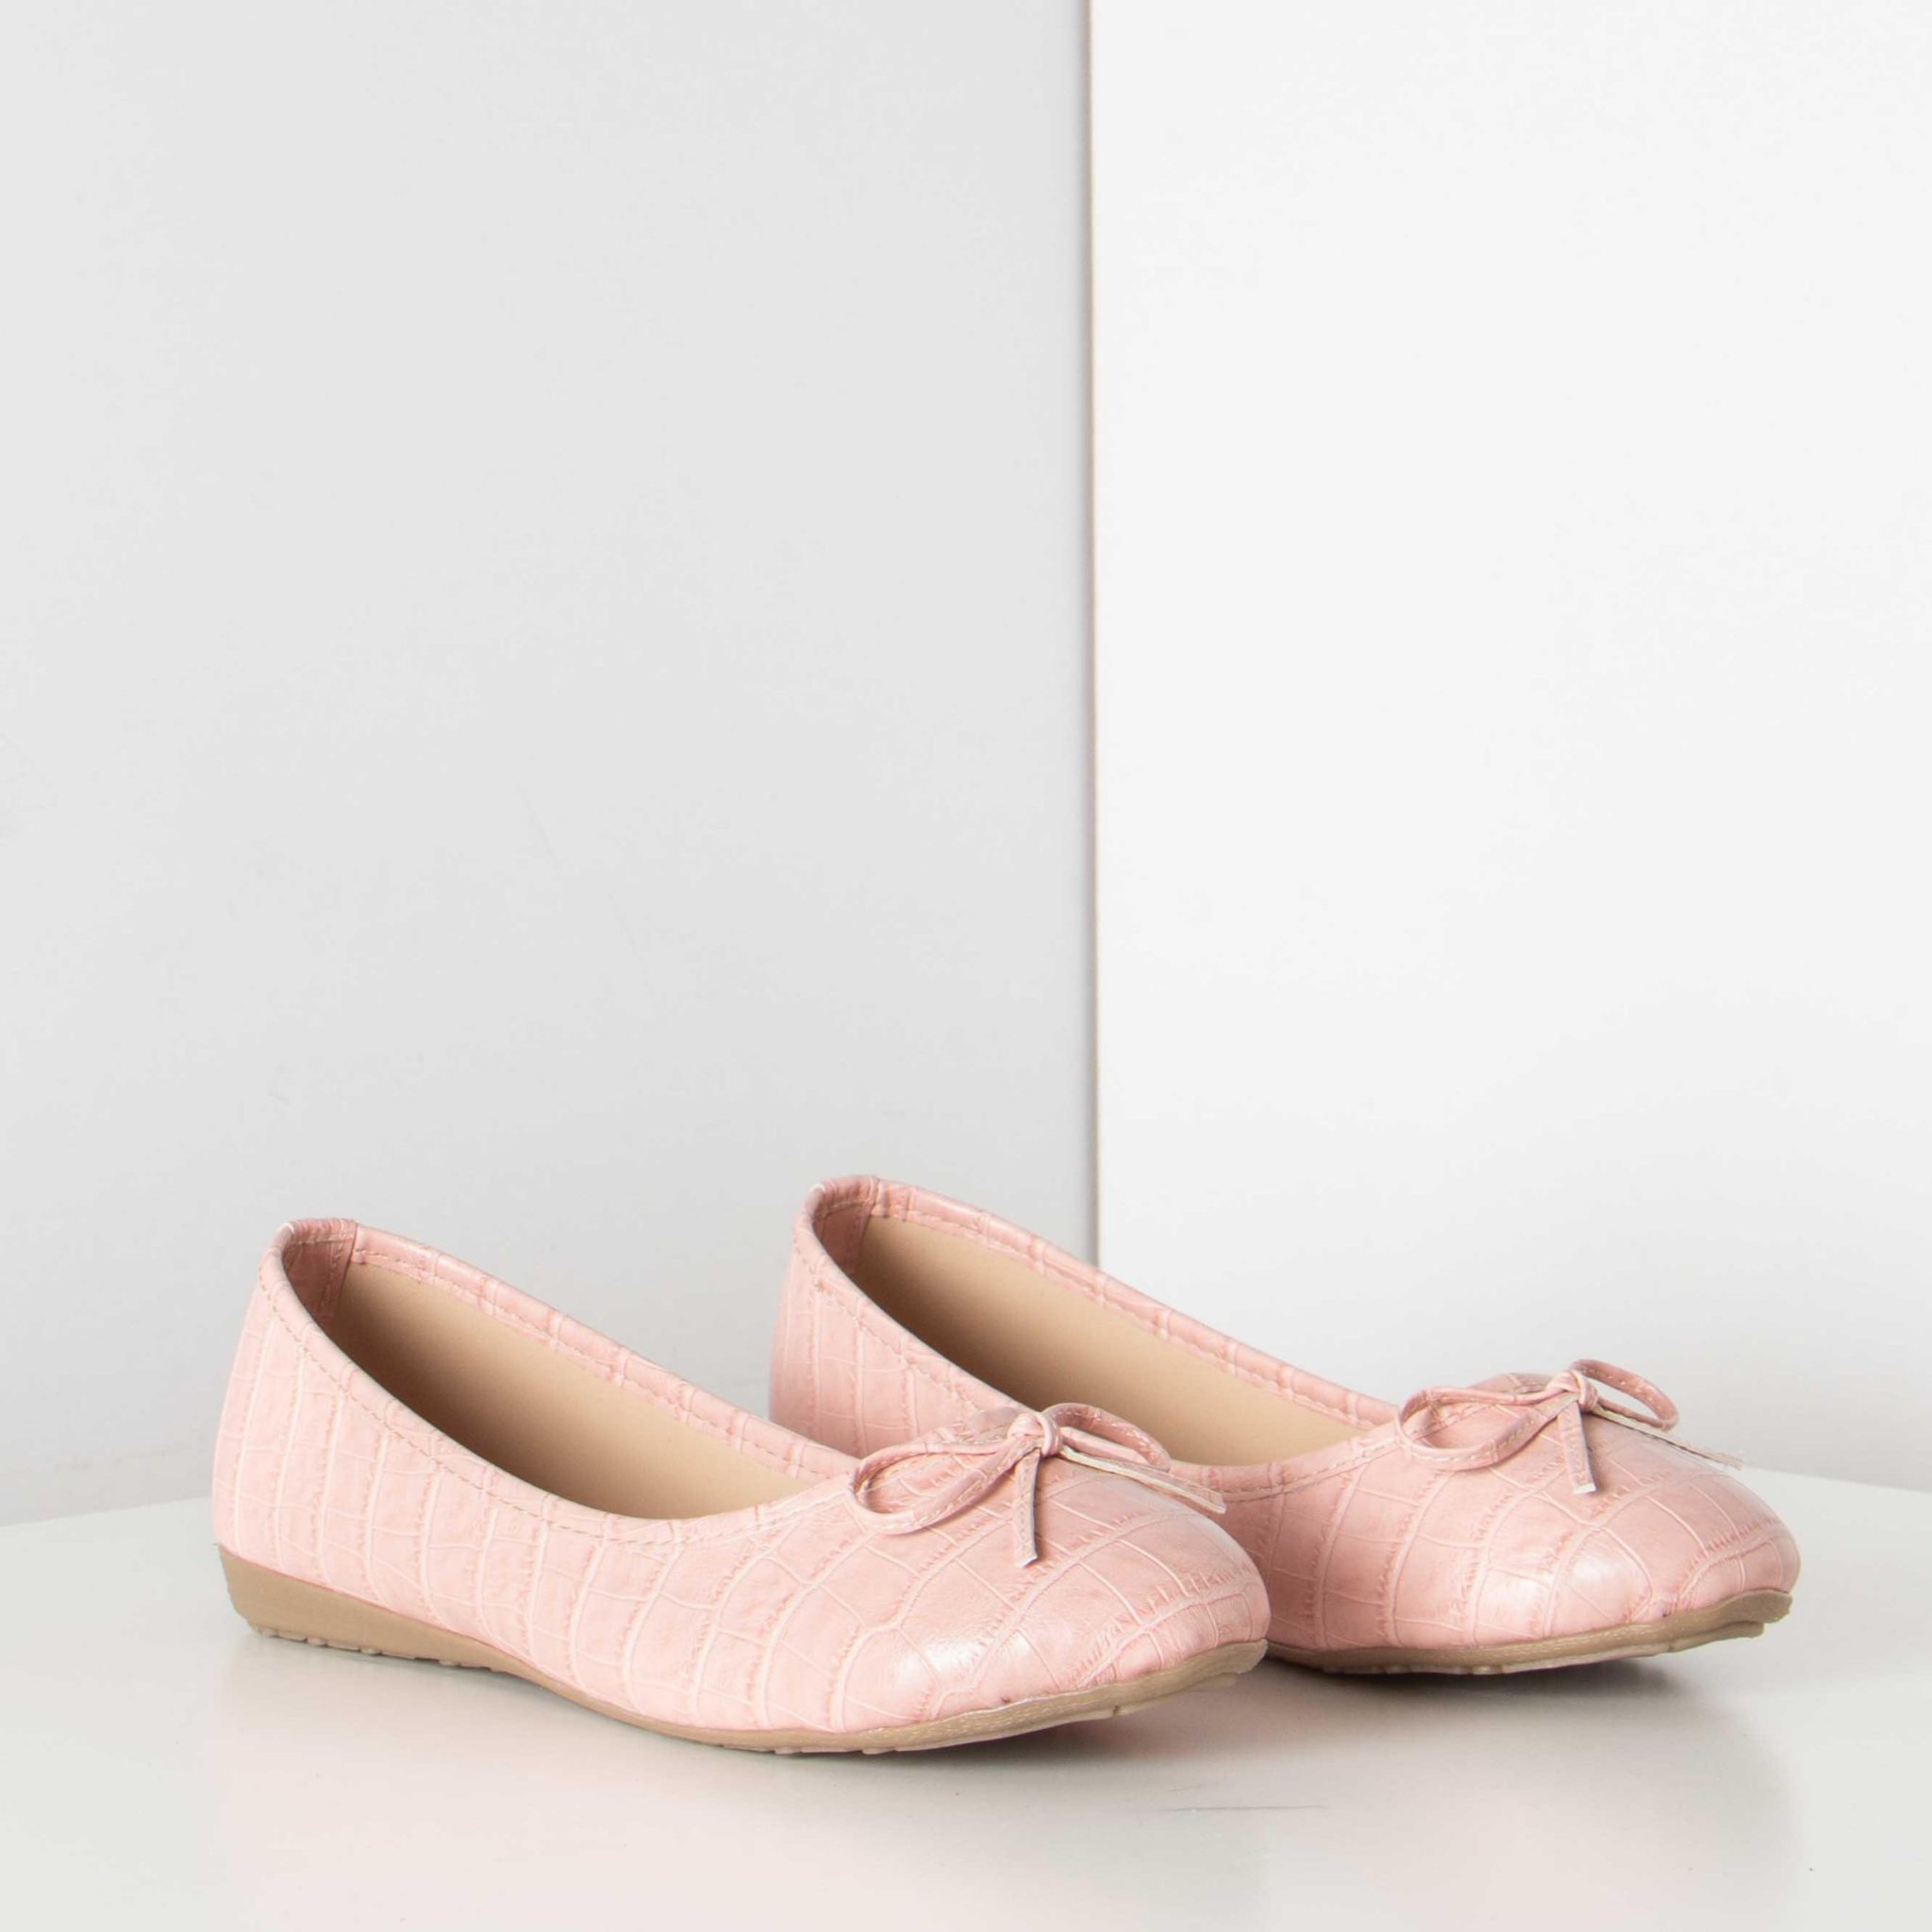 Chaussures Ballerines Ballerines à lacets Bershka Ballerines \u00e0 lacets rose chair-rose style d\u00e9contract\u00e9 